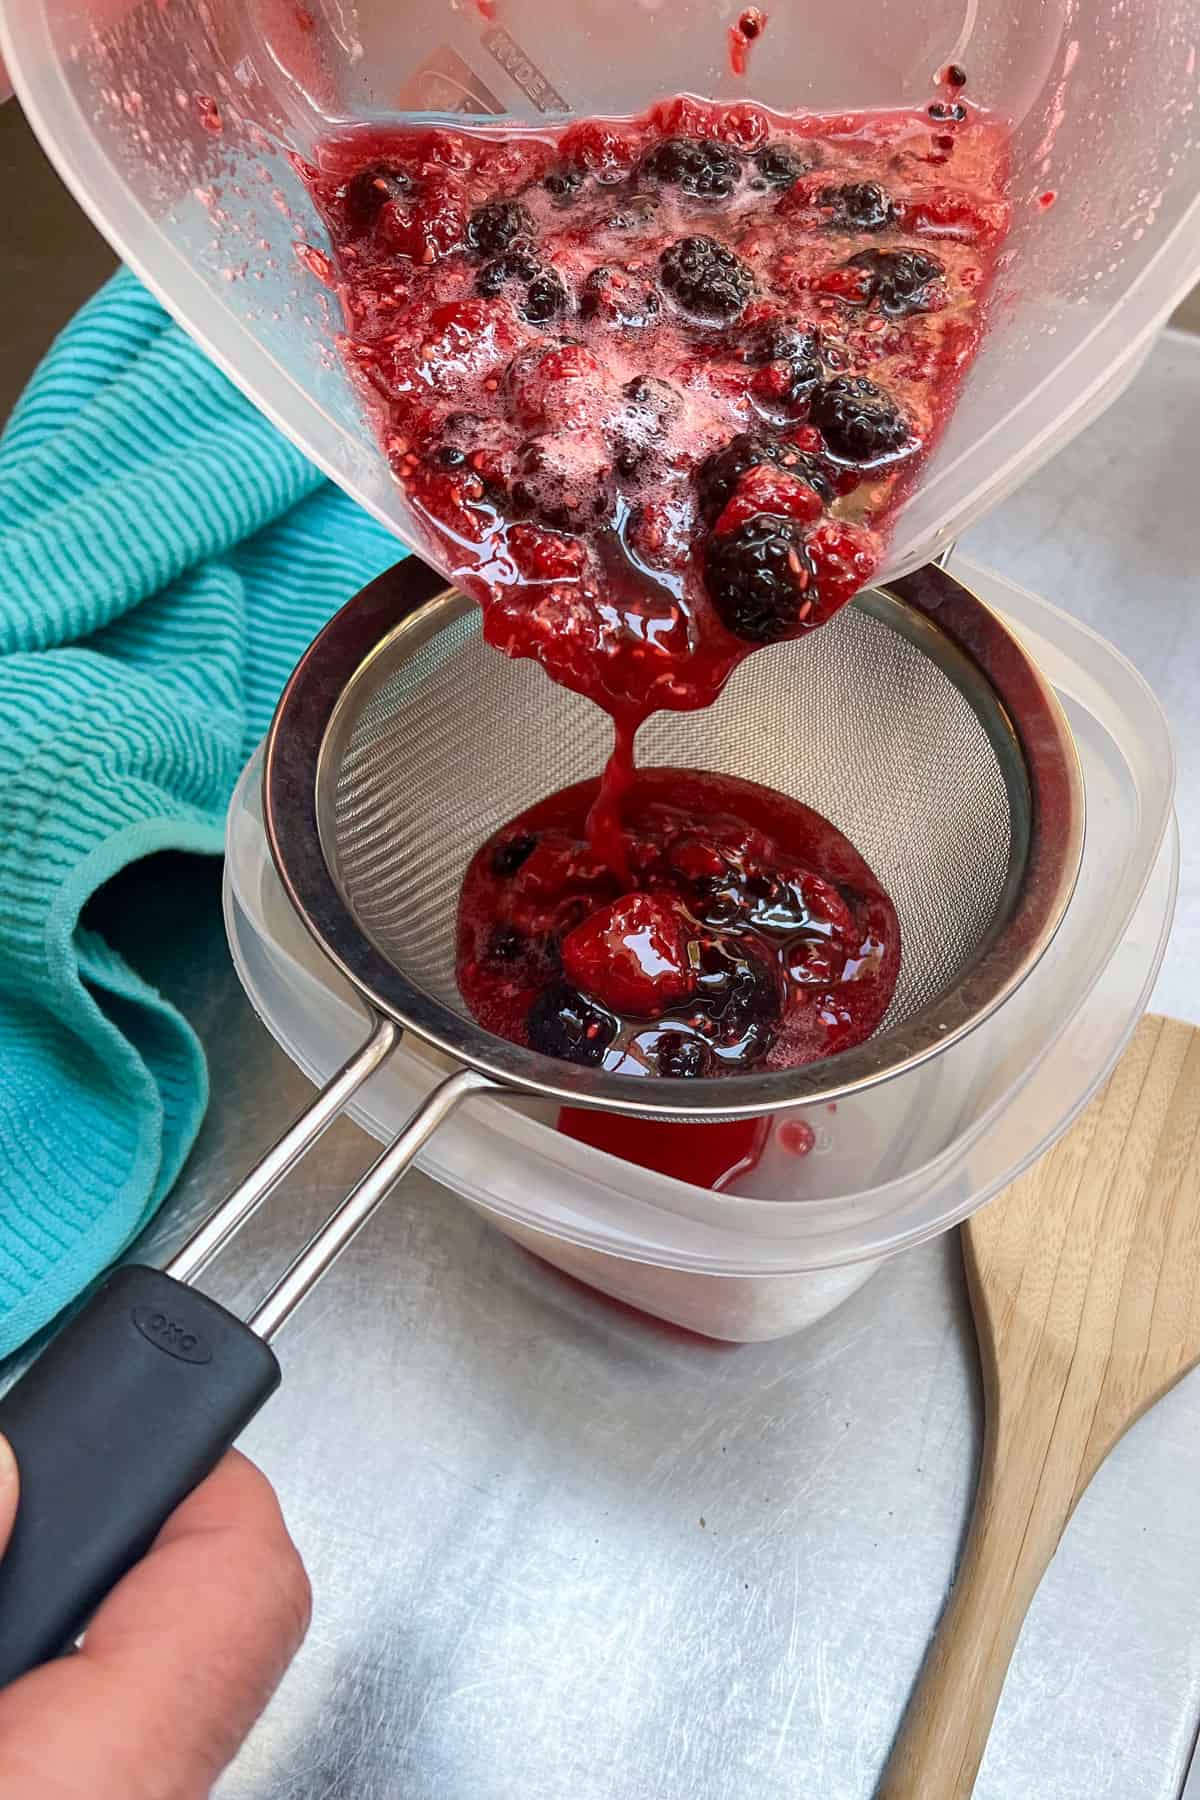 macerated berries with their juices being poured through a small mesh stainer into a plastic container below